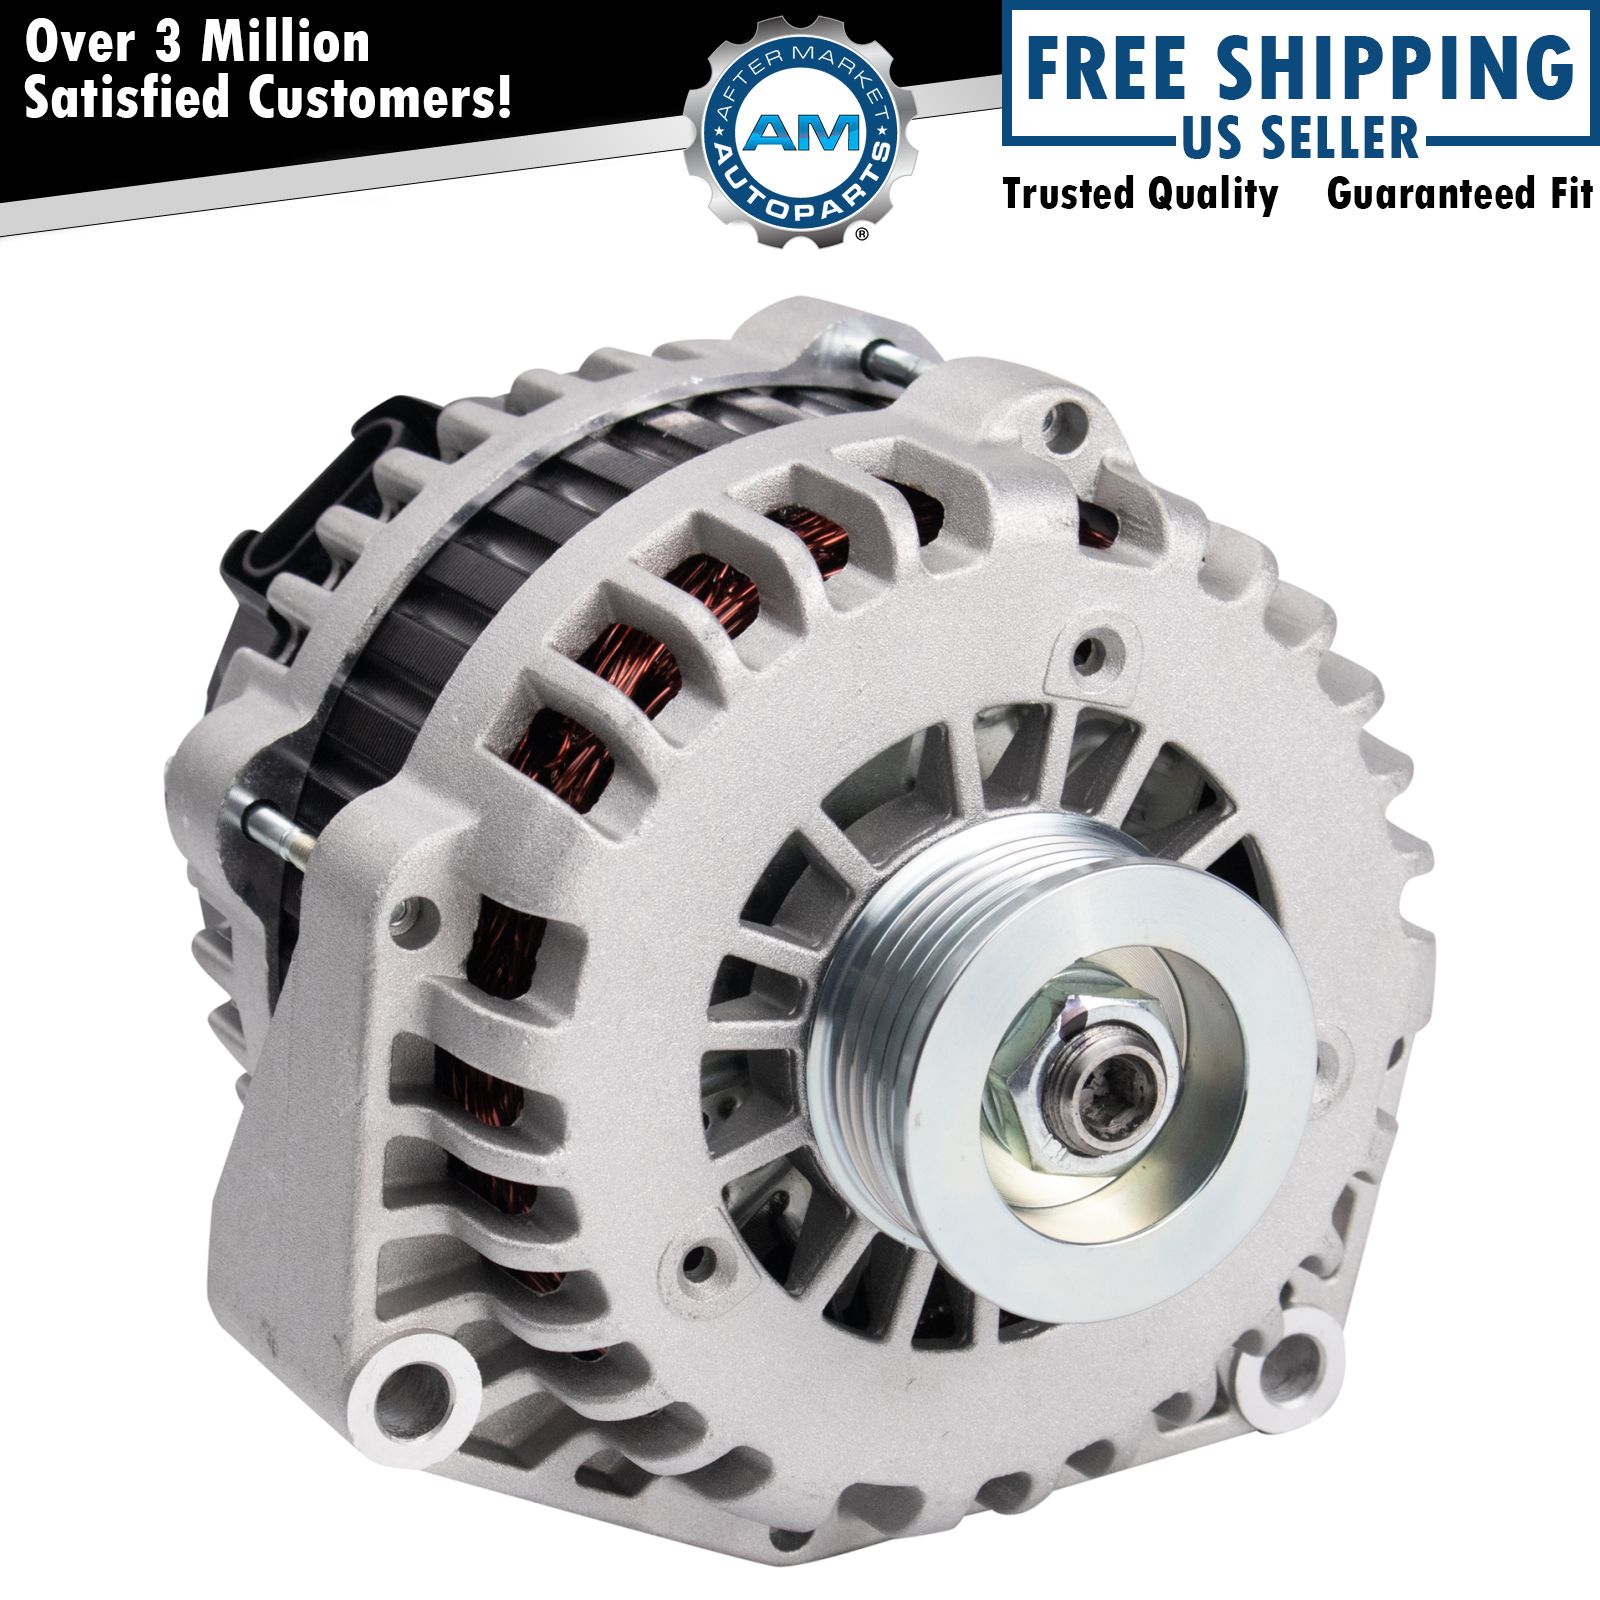 New Replacement Alternator for Chevy GM Silverado 1500 2500 AD244